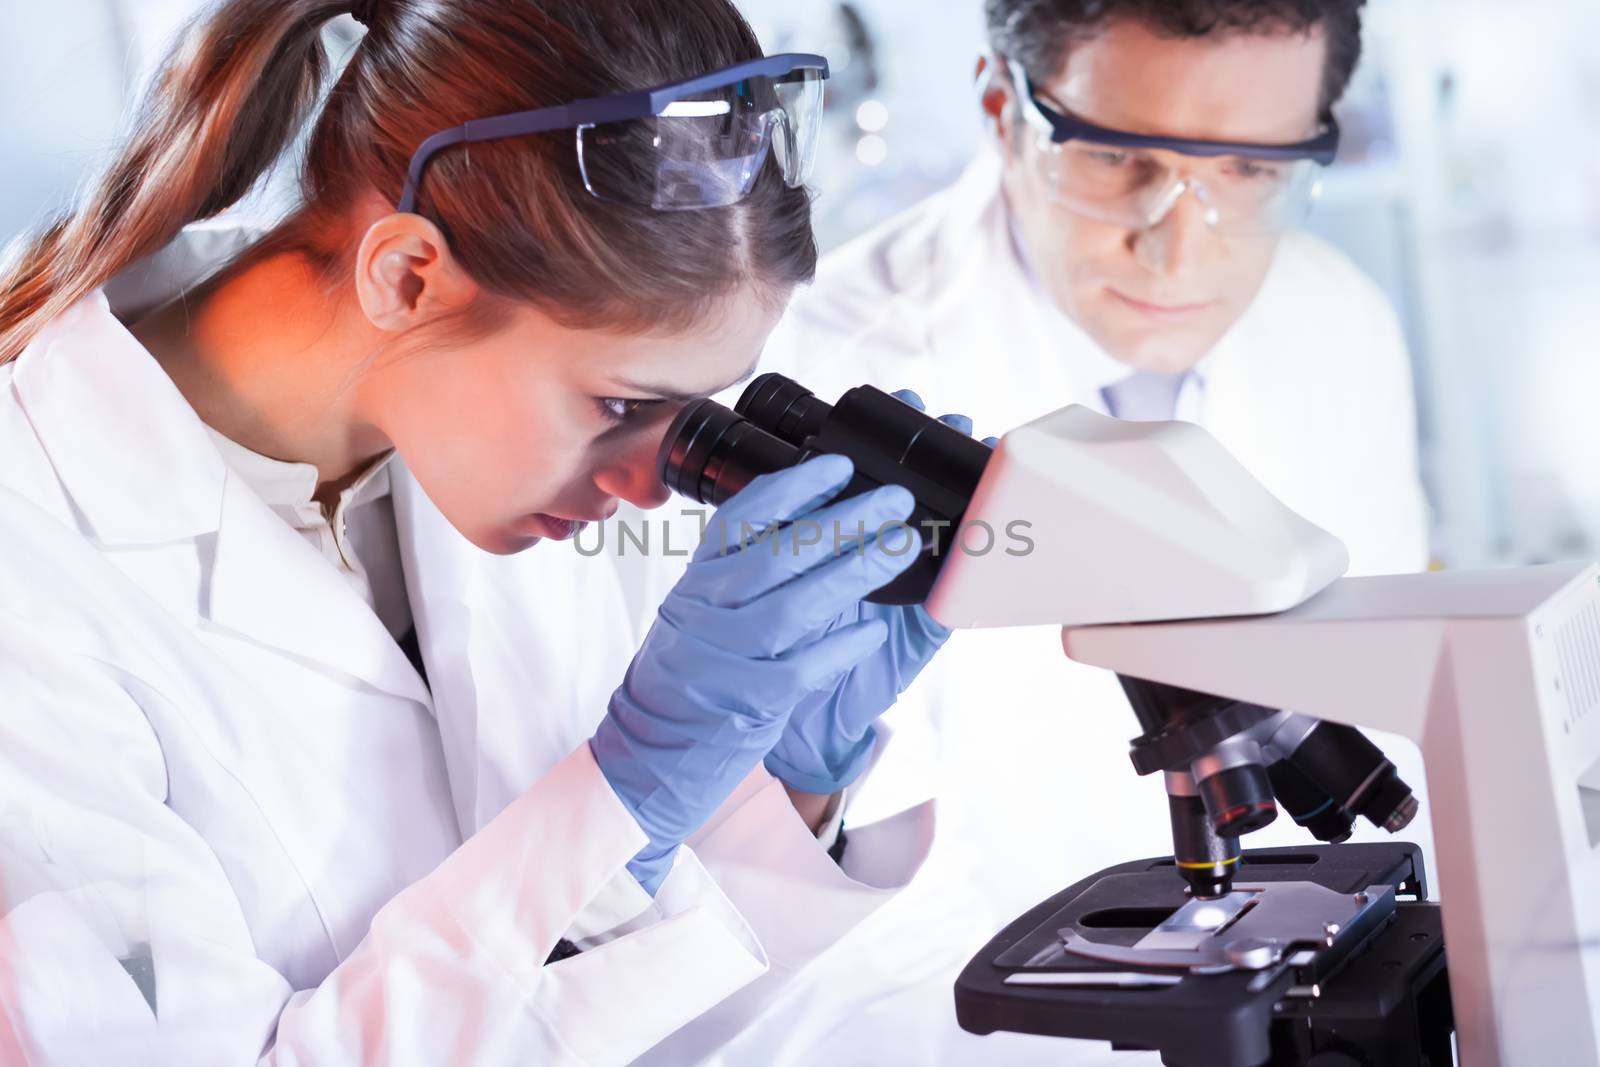 Life scientists researching in laboratory. Attractive female young scientist and her doctoral supervisor microscoping in their working environment. Healthcare and biotechnology.